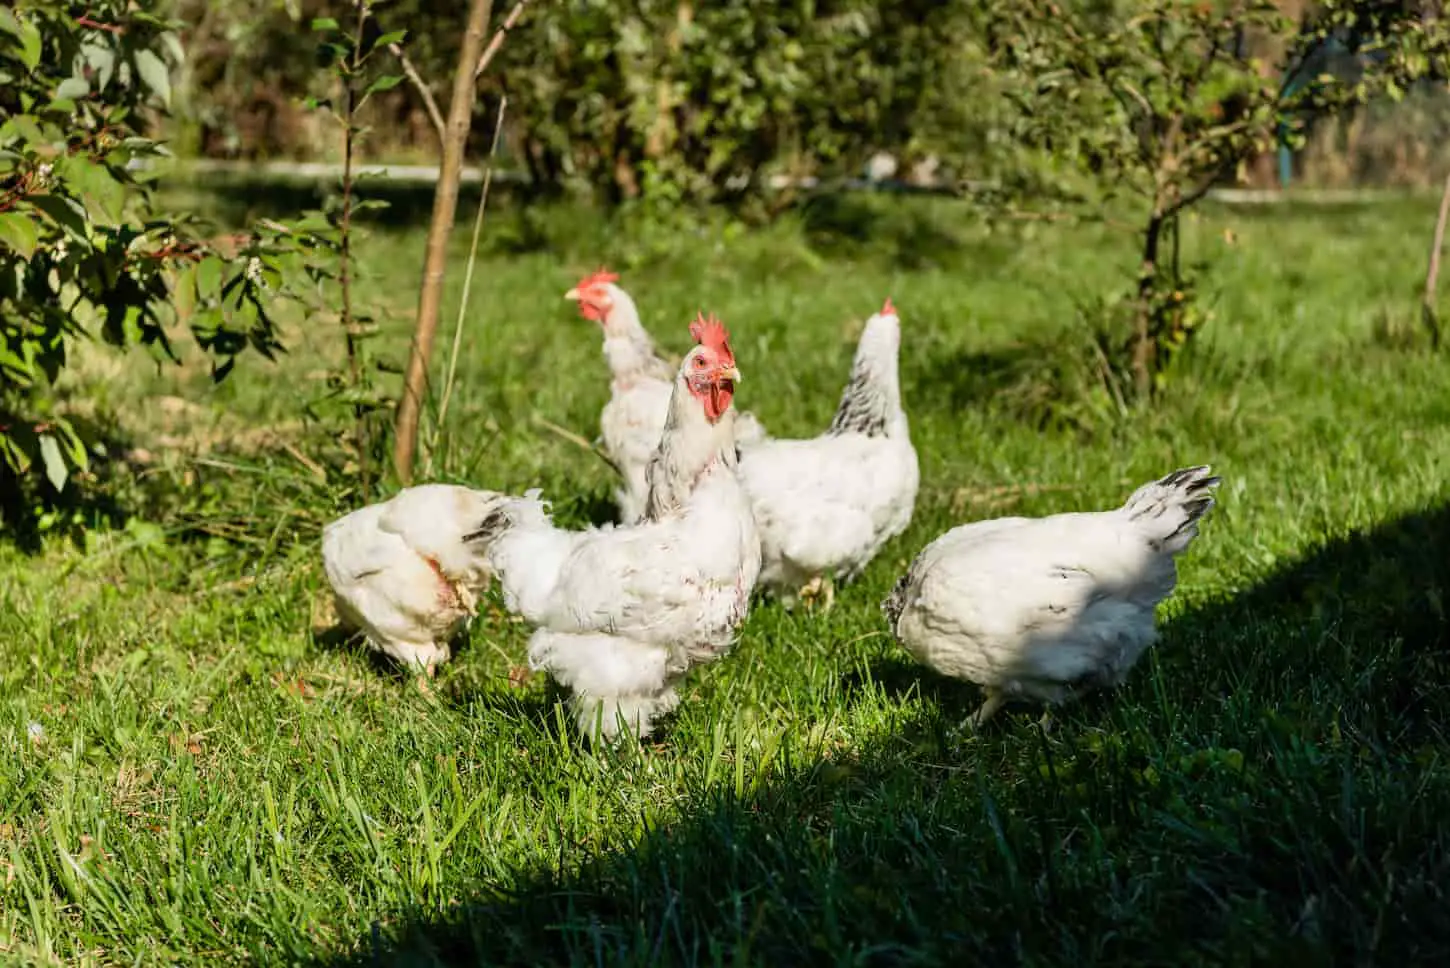 An image of a flock of adorable white chickens walking on a grassy meadow at a farm.